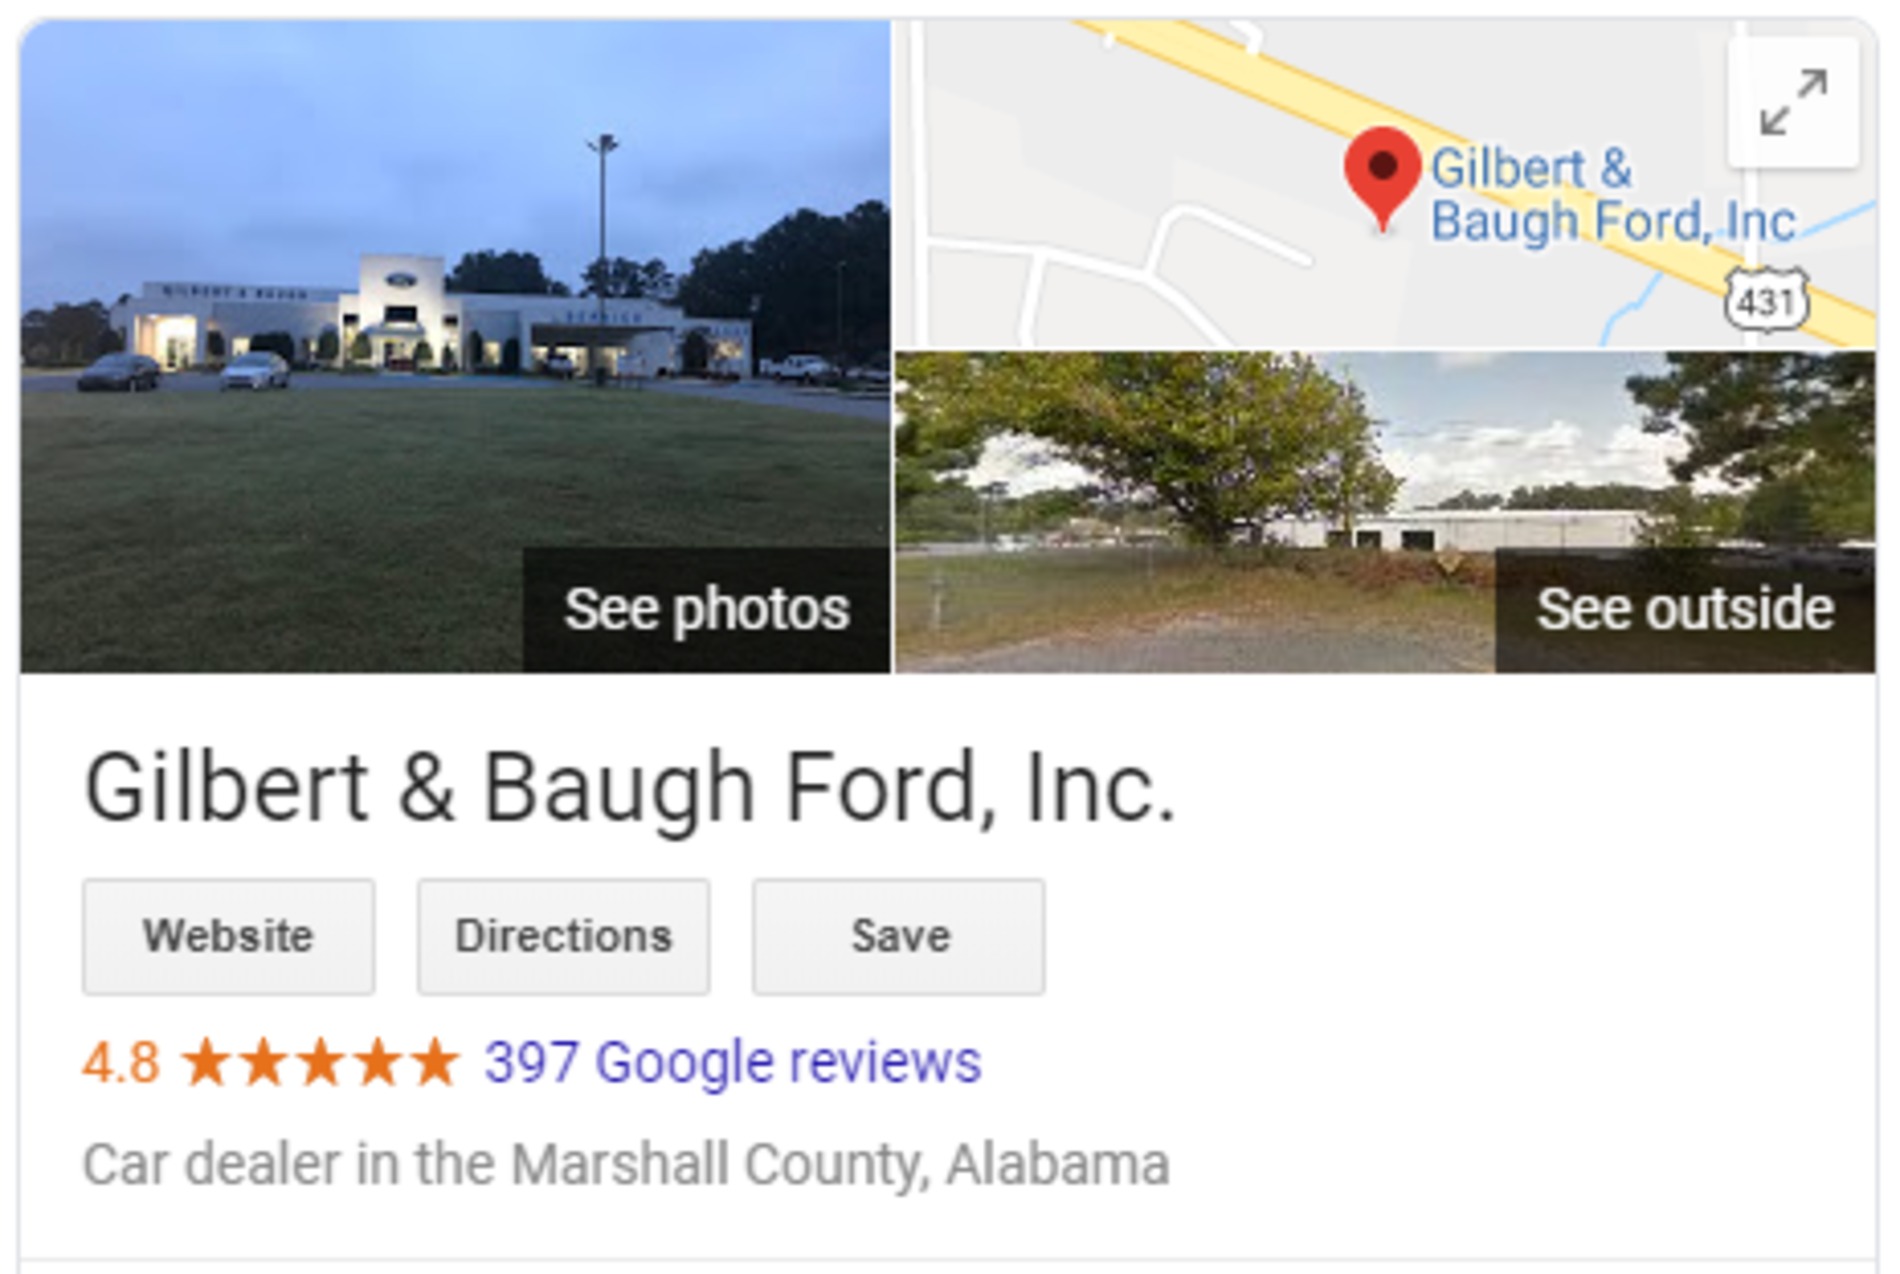 Google review example.